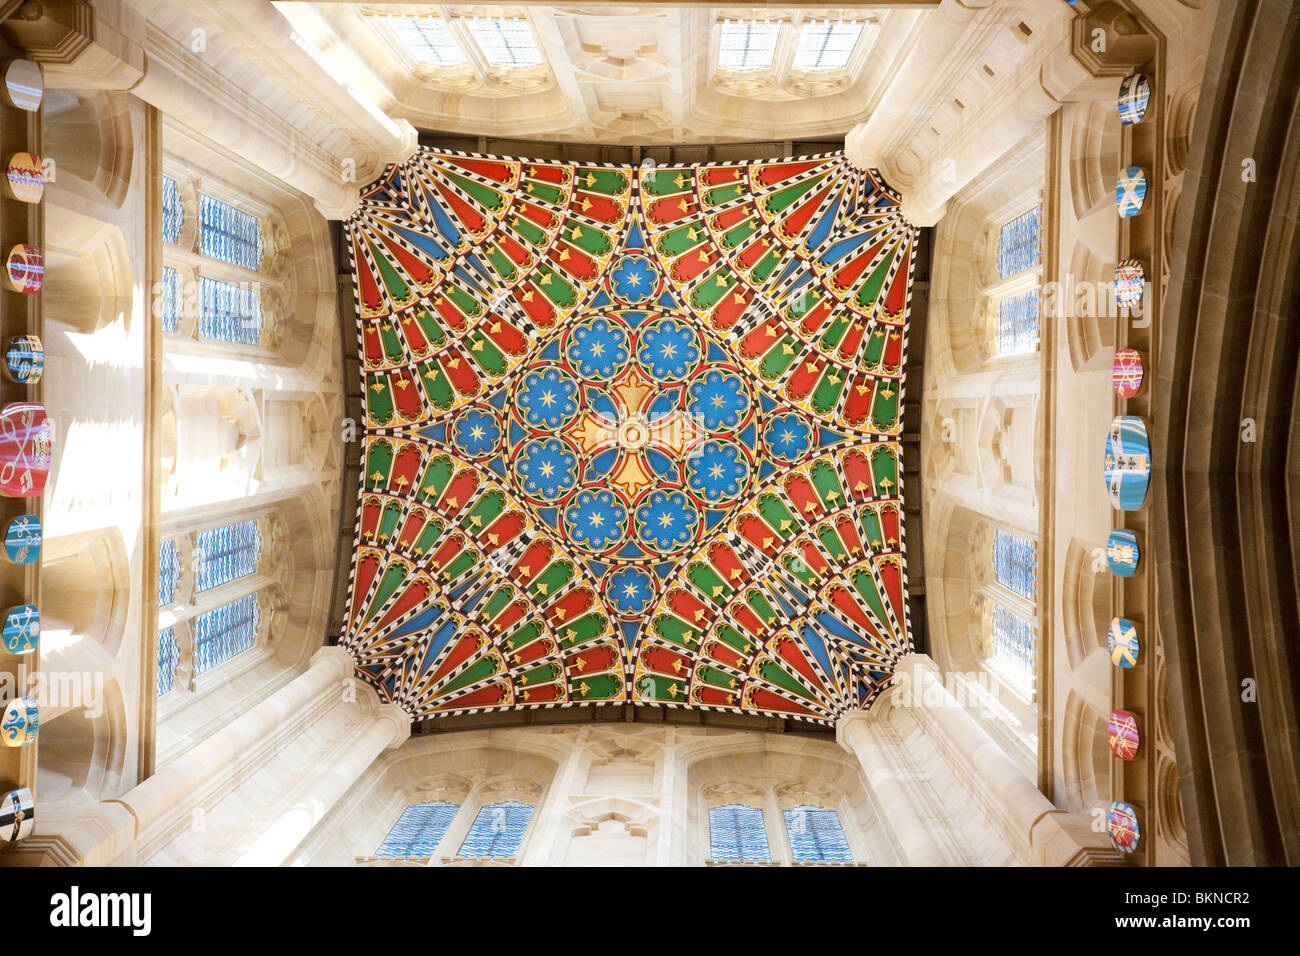 the new decorated vaulted ceiling in the tower of St James / St Edmundsbury Cathedral installed in 2010 Stock Photo